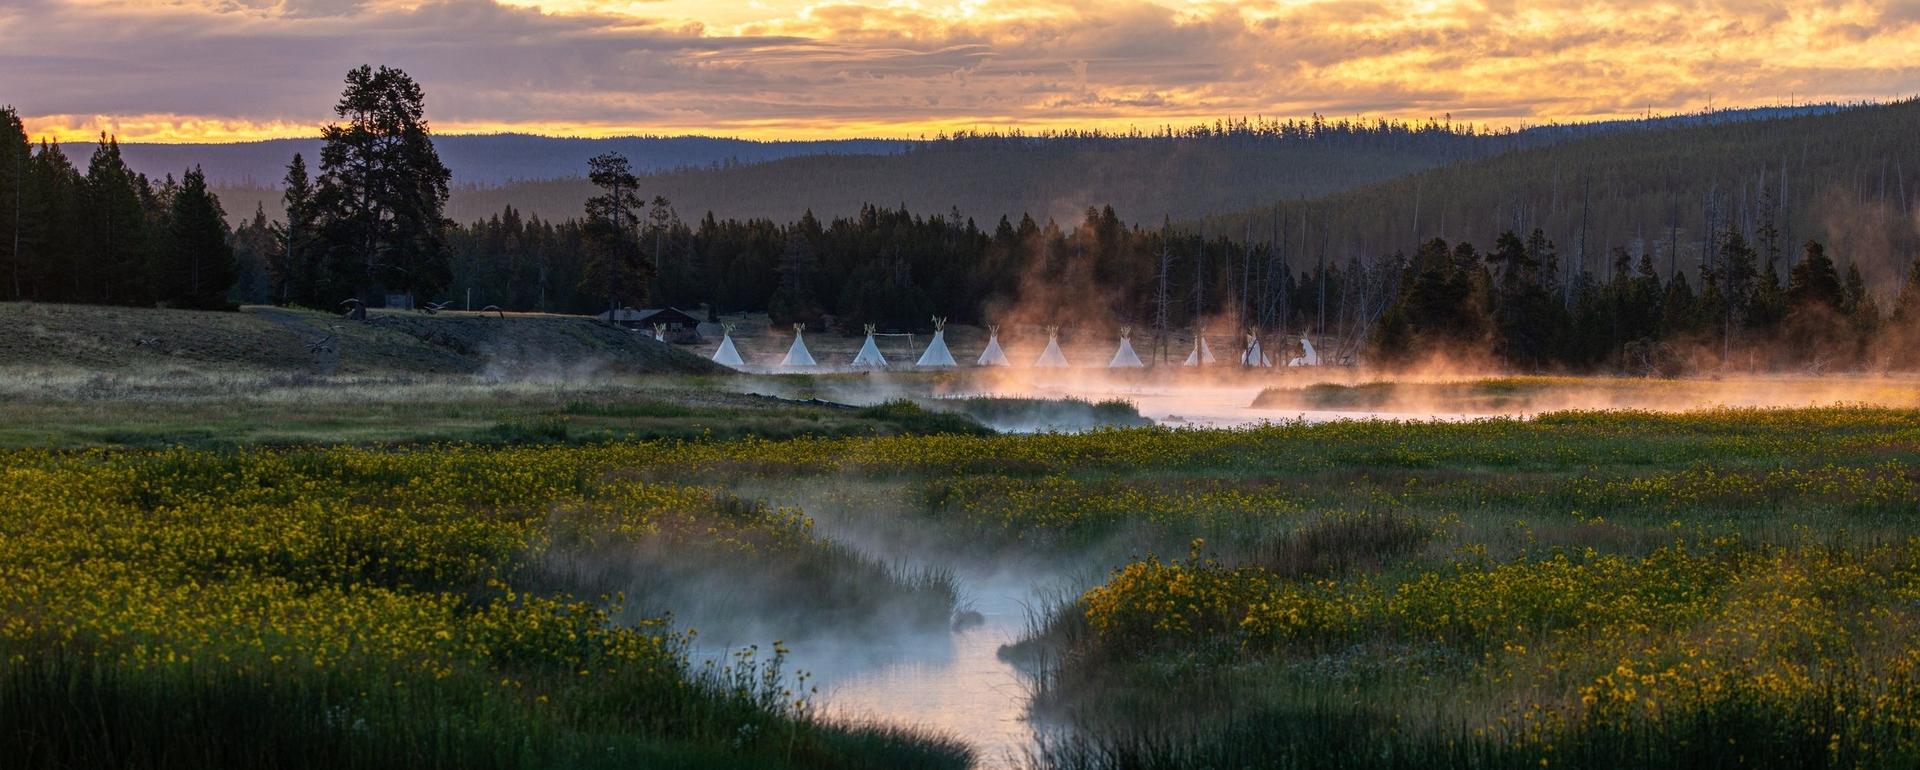 Today and yesterday: the Yellowstone Revealed project depicted the historic and current presence of Indigenous people in Greater Yellowstone